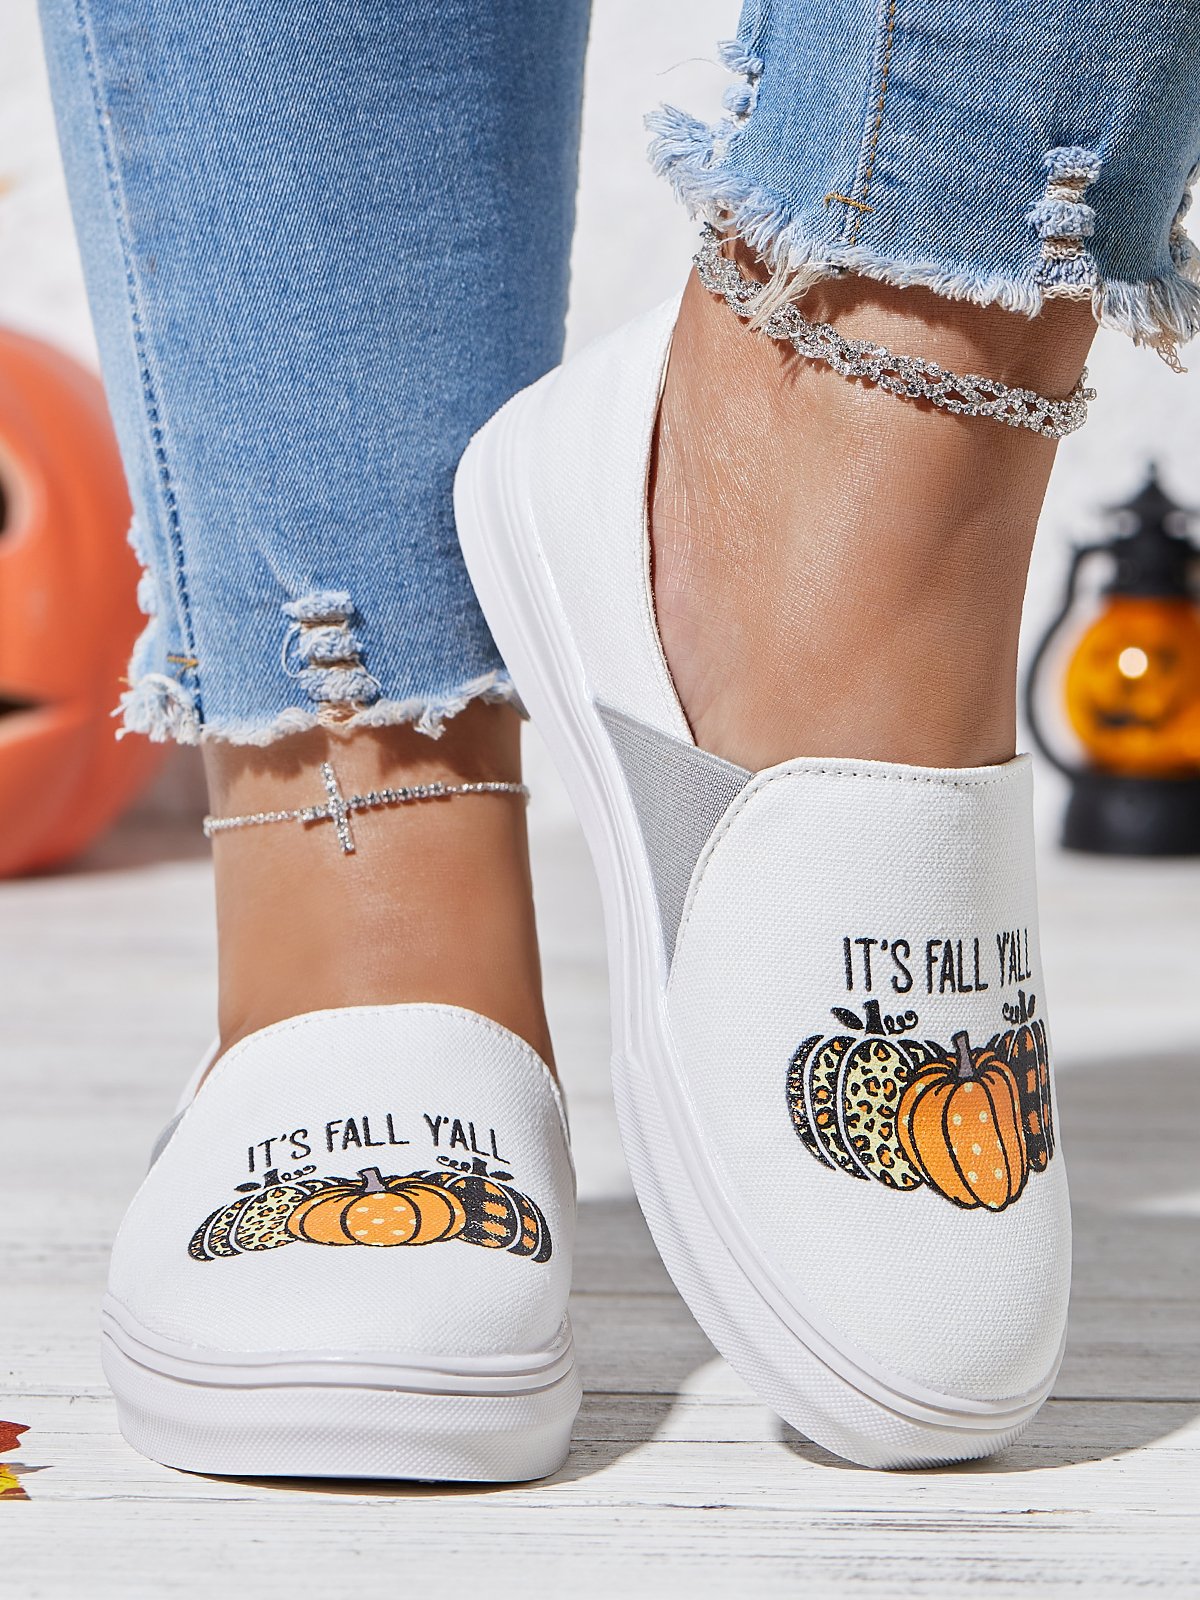 Fall Flats/loafers